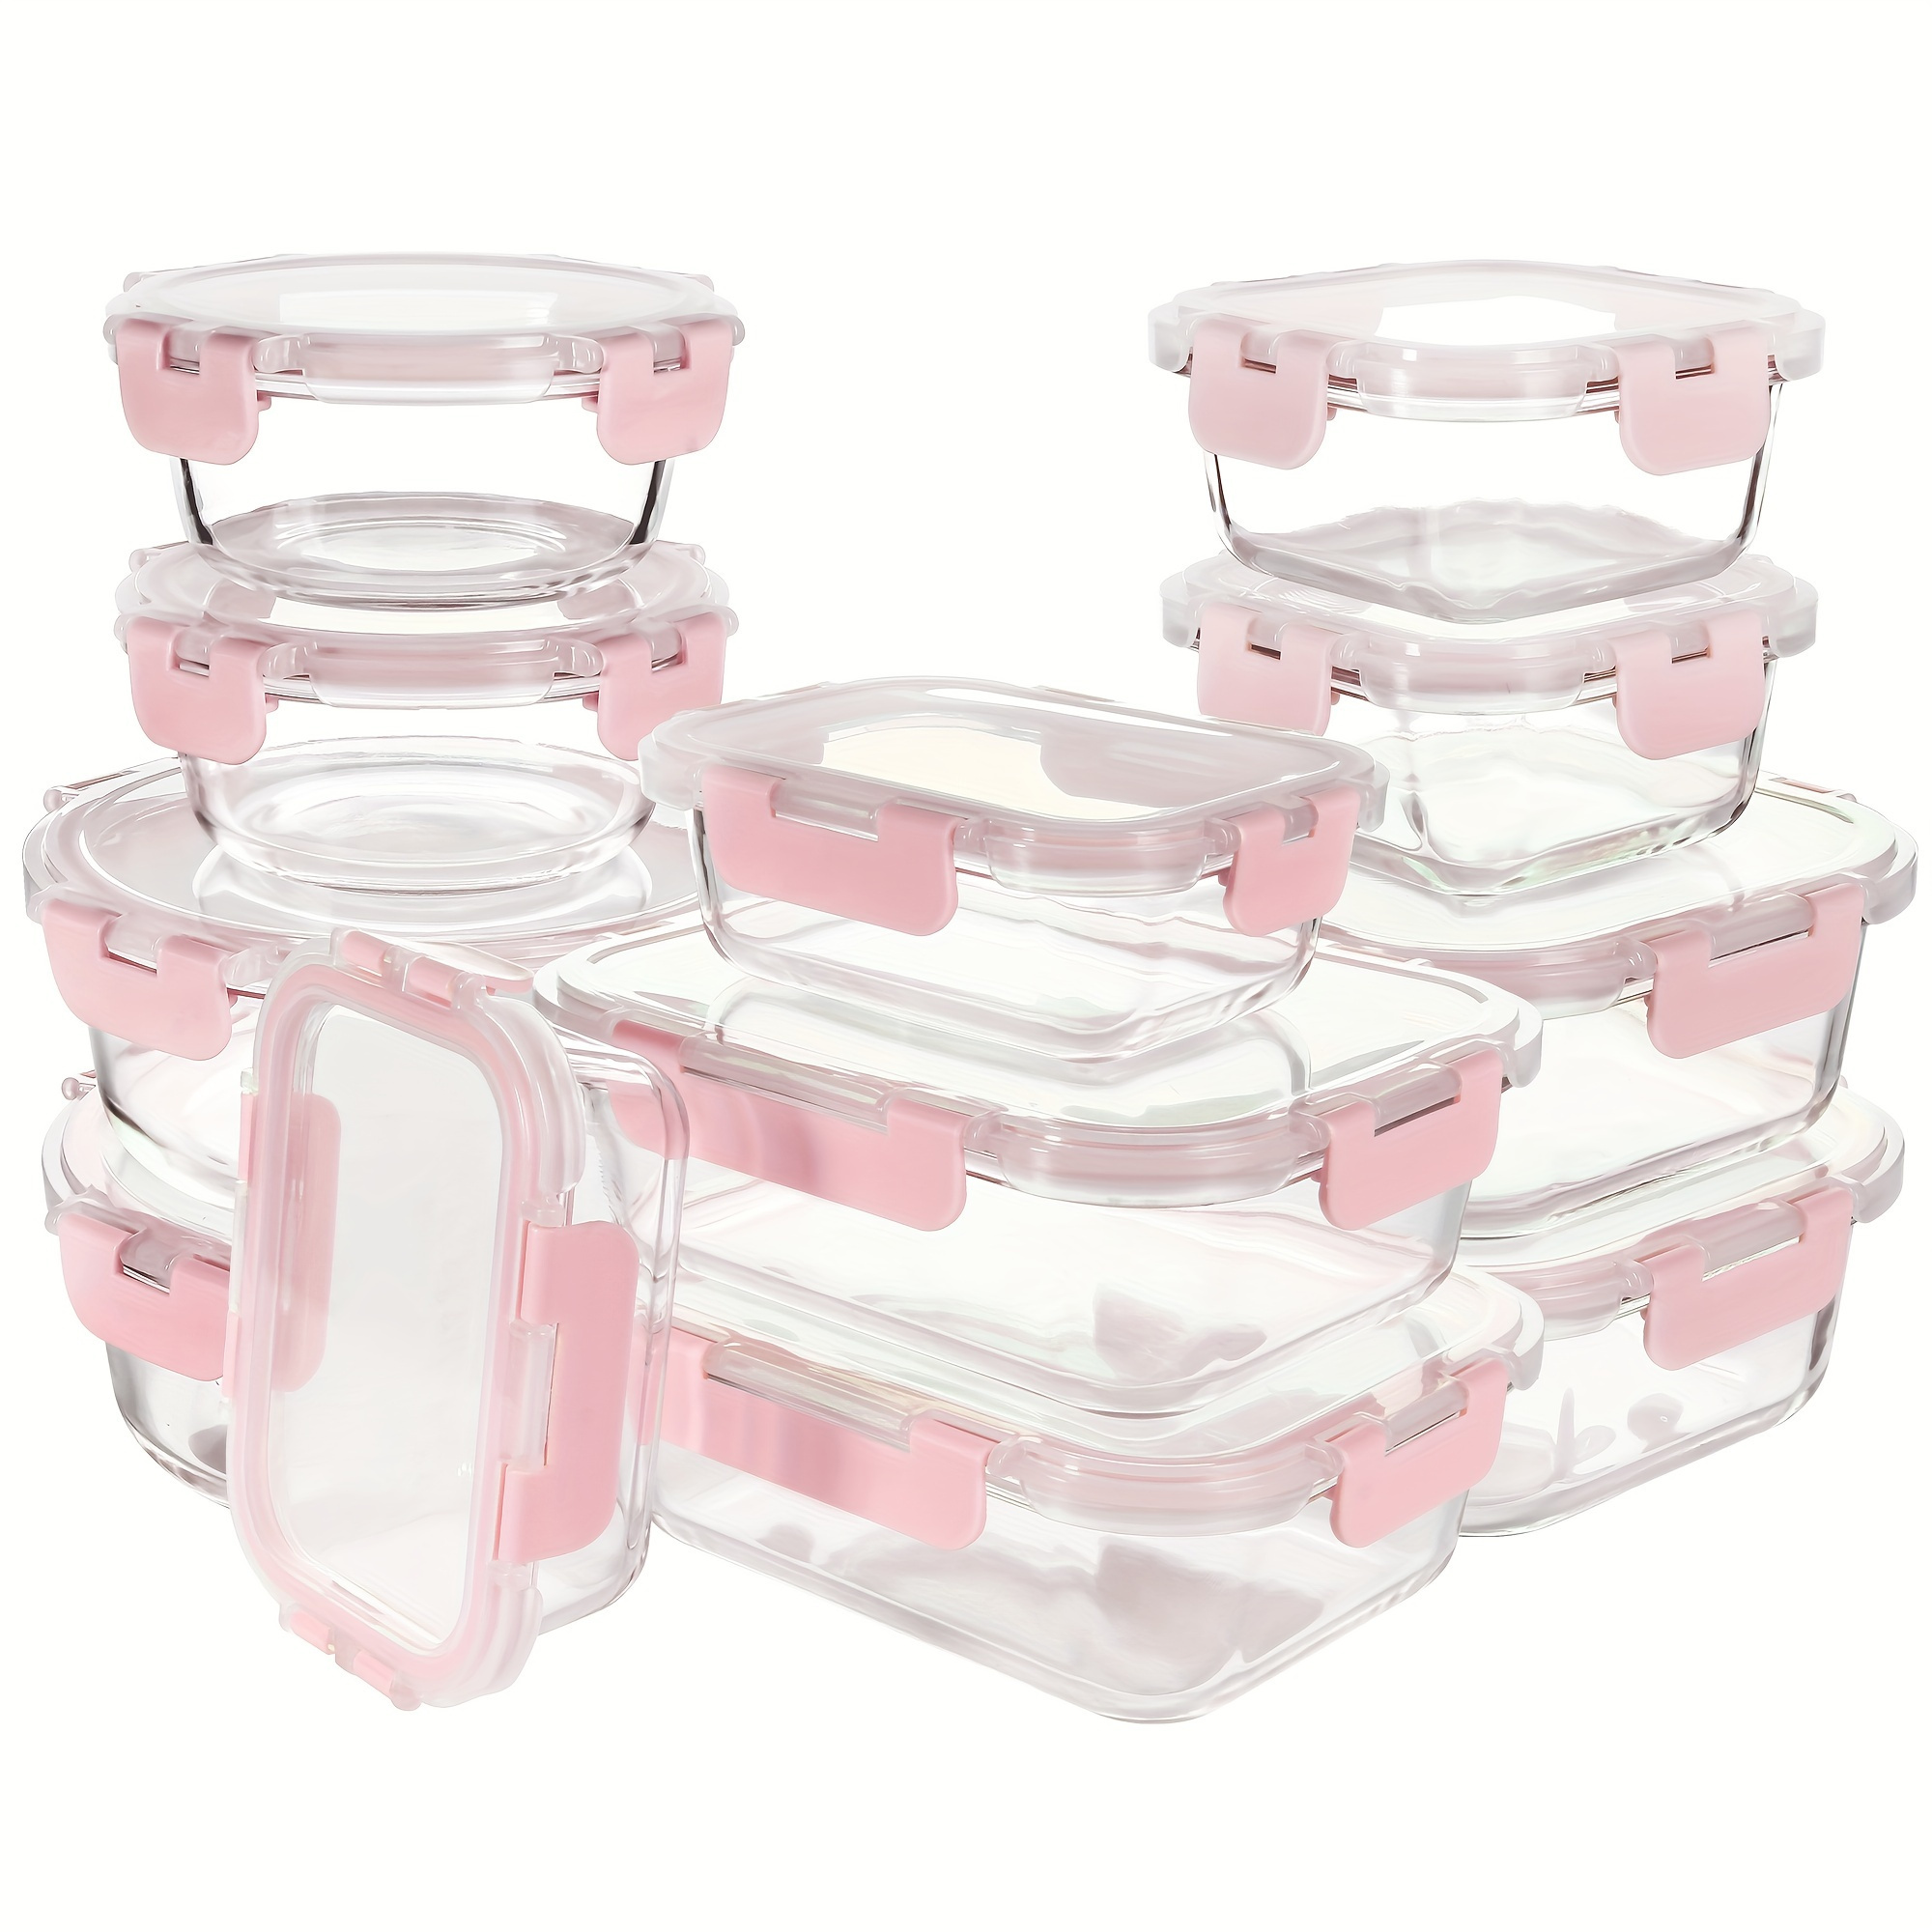 

12pcs Pack Glass Storage Containers With Lids, Leak-proof Meal Prep Containers, Dishwasher/freezer Safe Glass Food Storage Containers For Leftovers, To Go